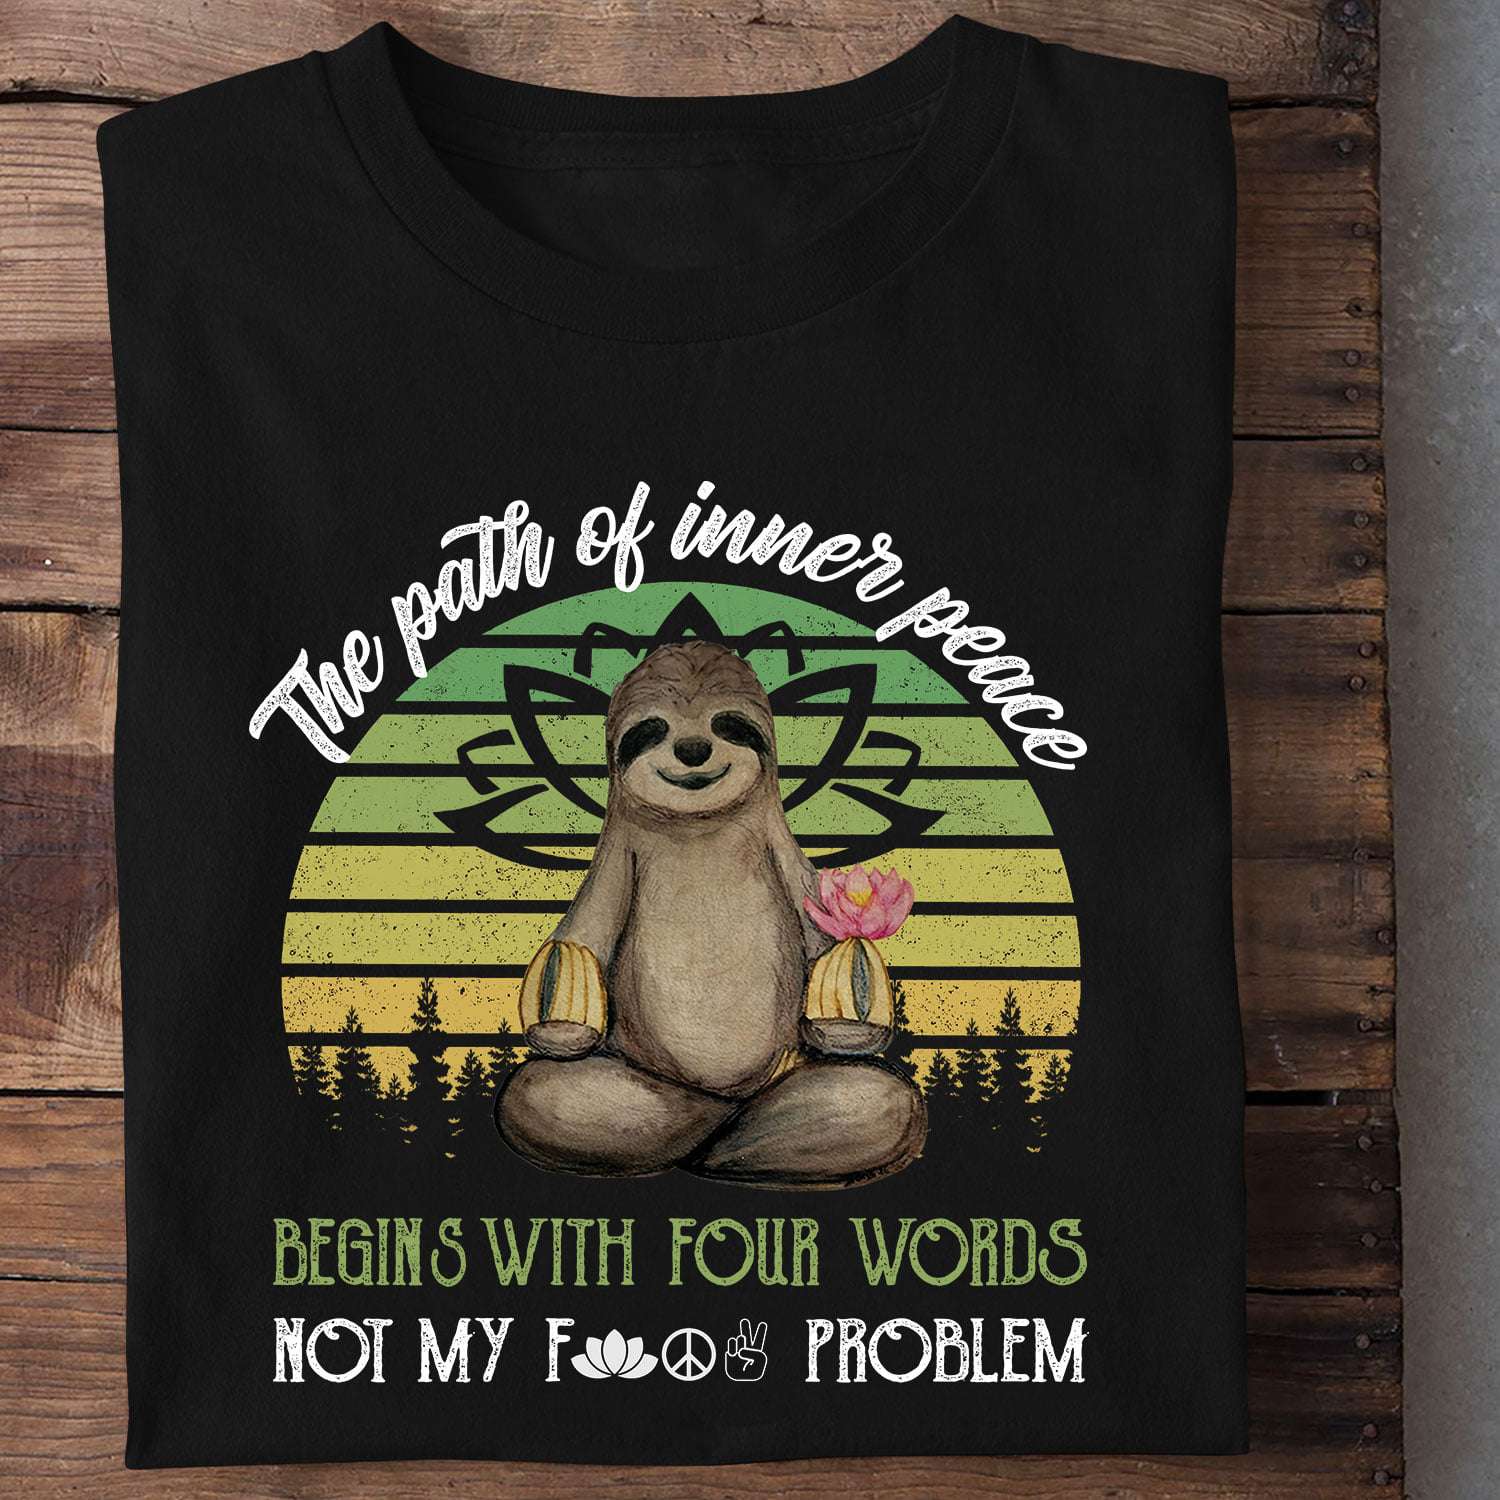 Sloth Yoga - The path of inner peace begins with four words